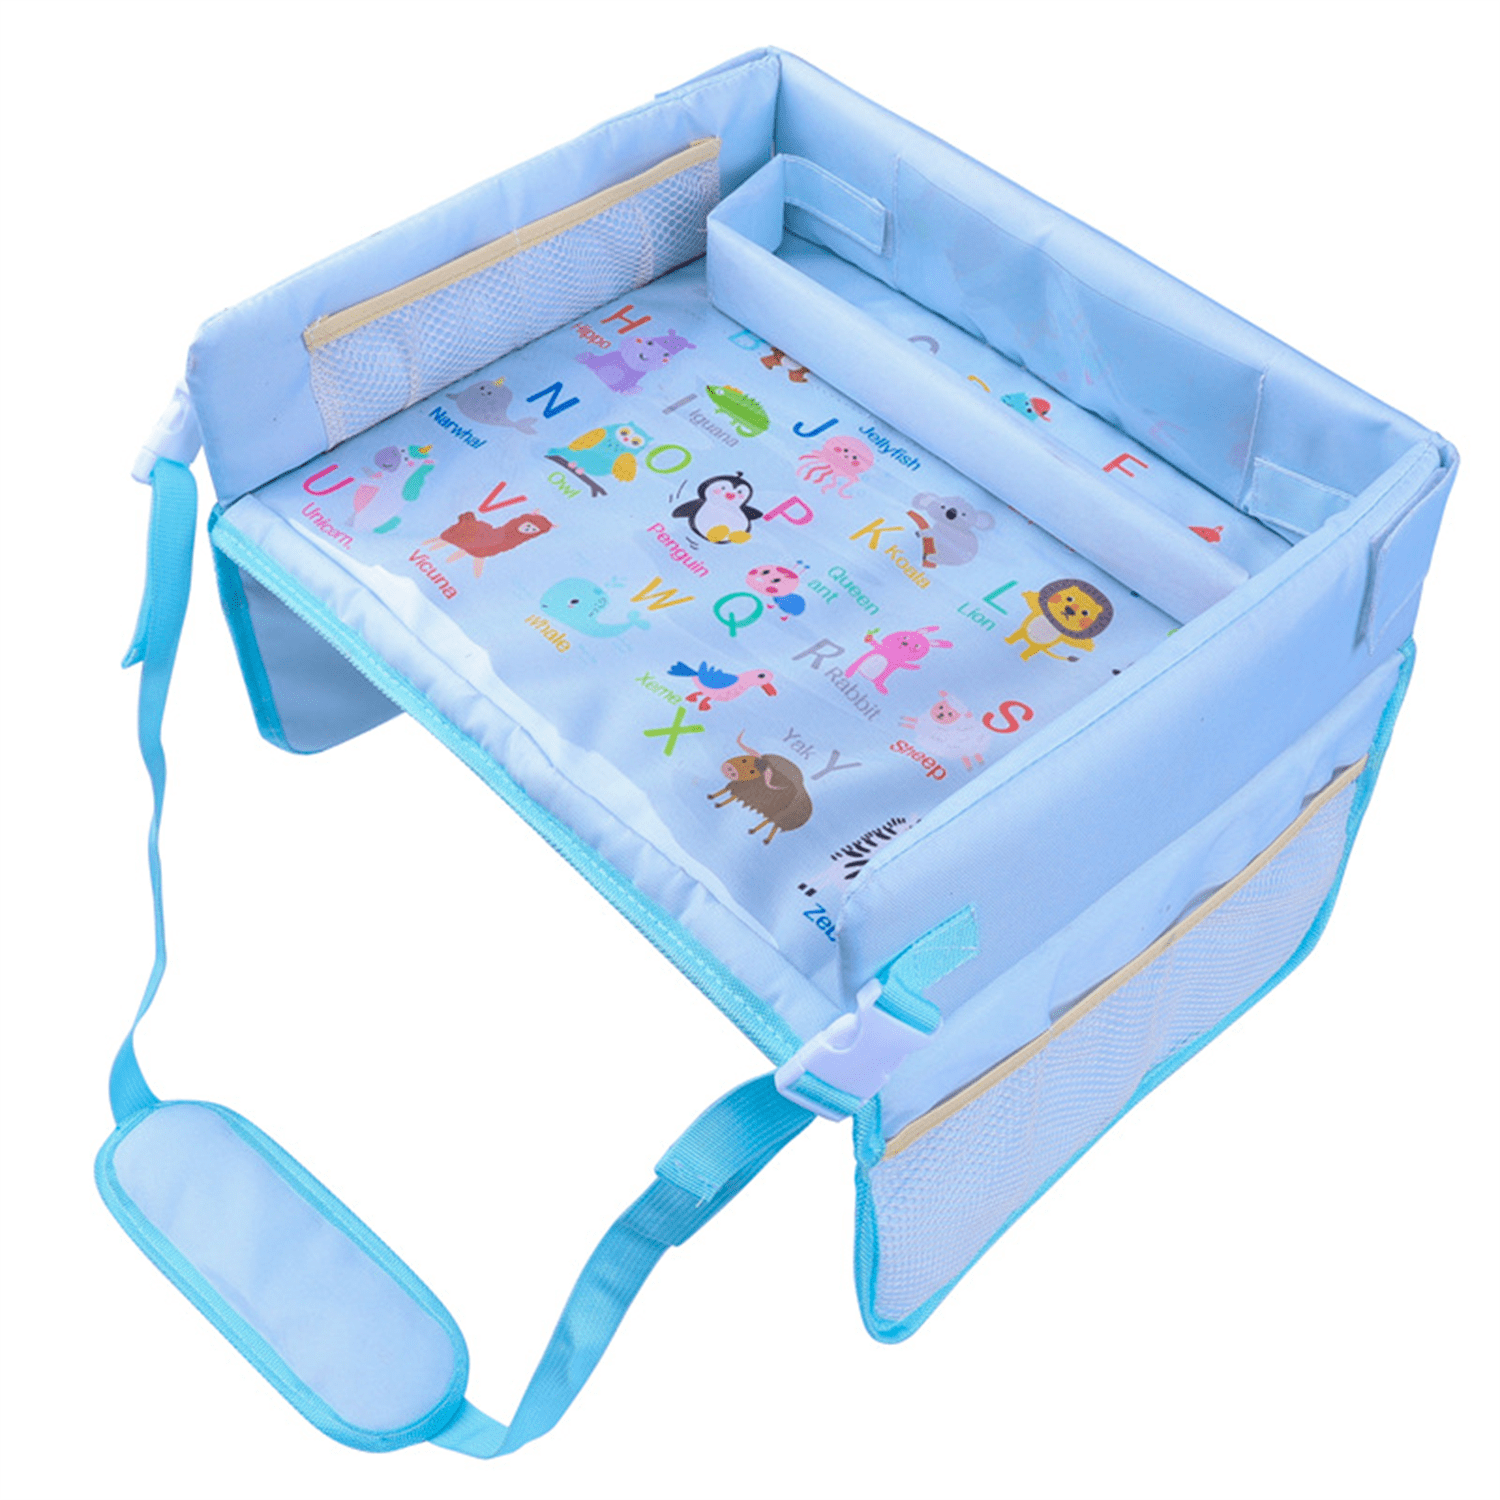 Kids Travel Tray Kids Activity Tray For Car Seat, Waterproof Kids Lap Desk  For Car Snacks And Activities Drawing Board With Storage Pocket Organ (3-d)